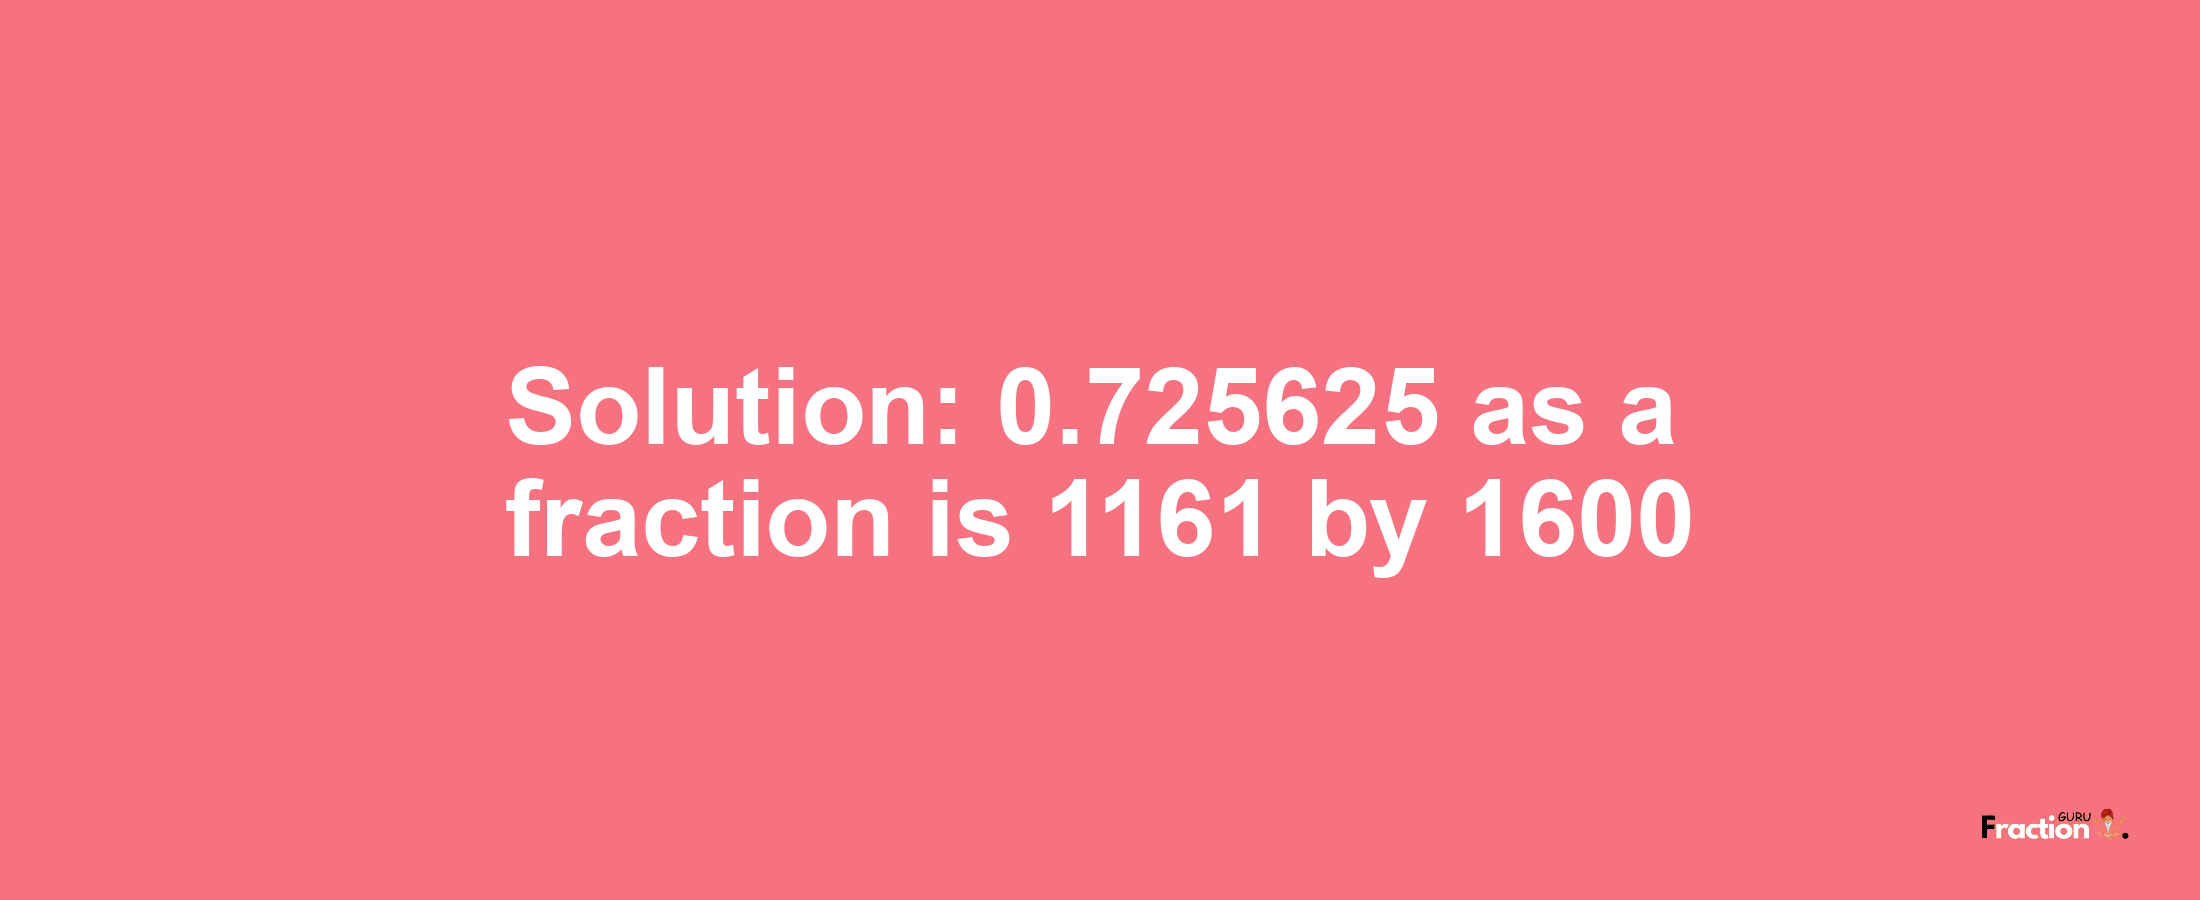 Solution:0.725625 as a fraction is 1161/1600